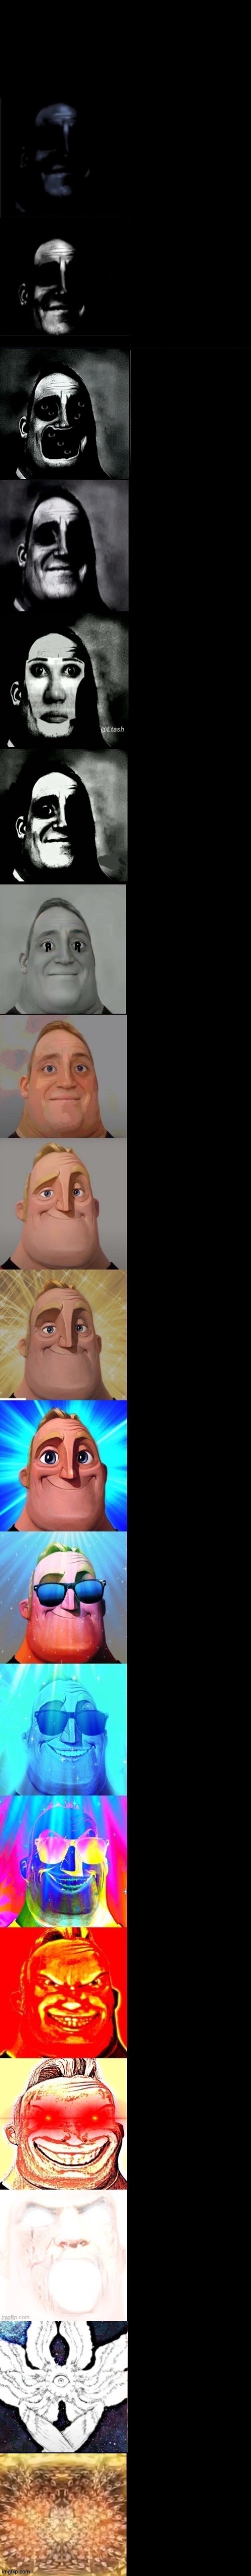 Mr Incredible Becoming Distorted to God Blank Meme Template